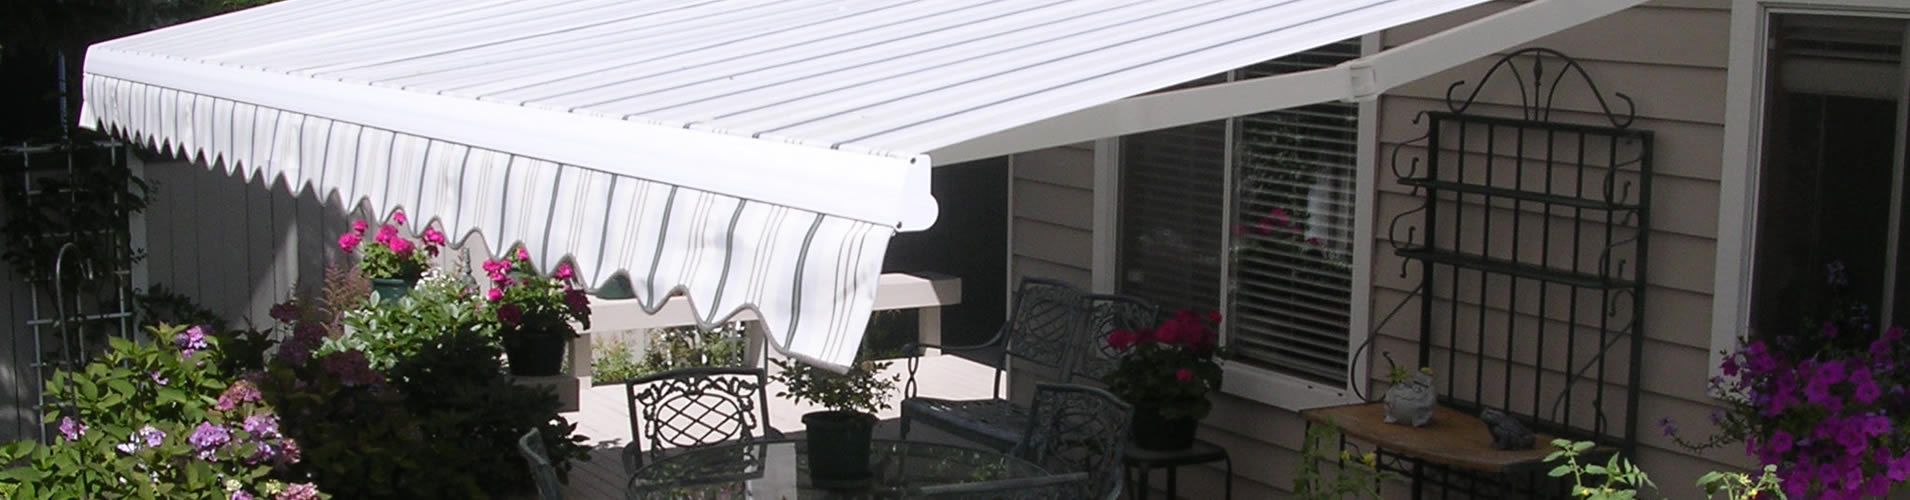 Palm Beach home save energy with an awning